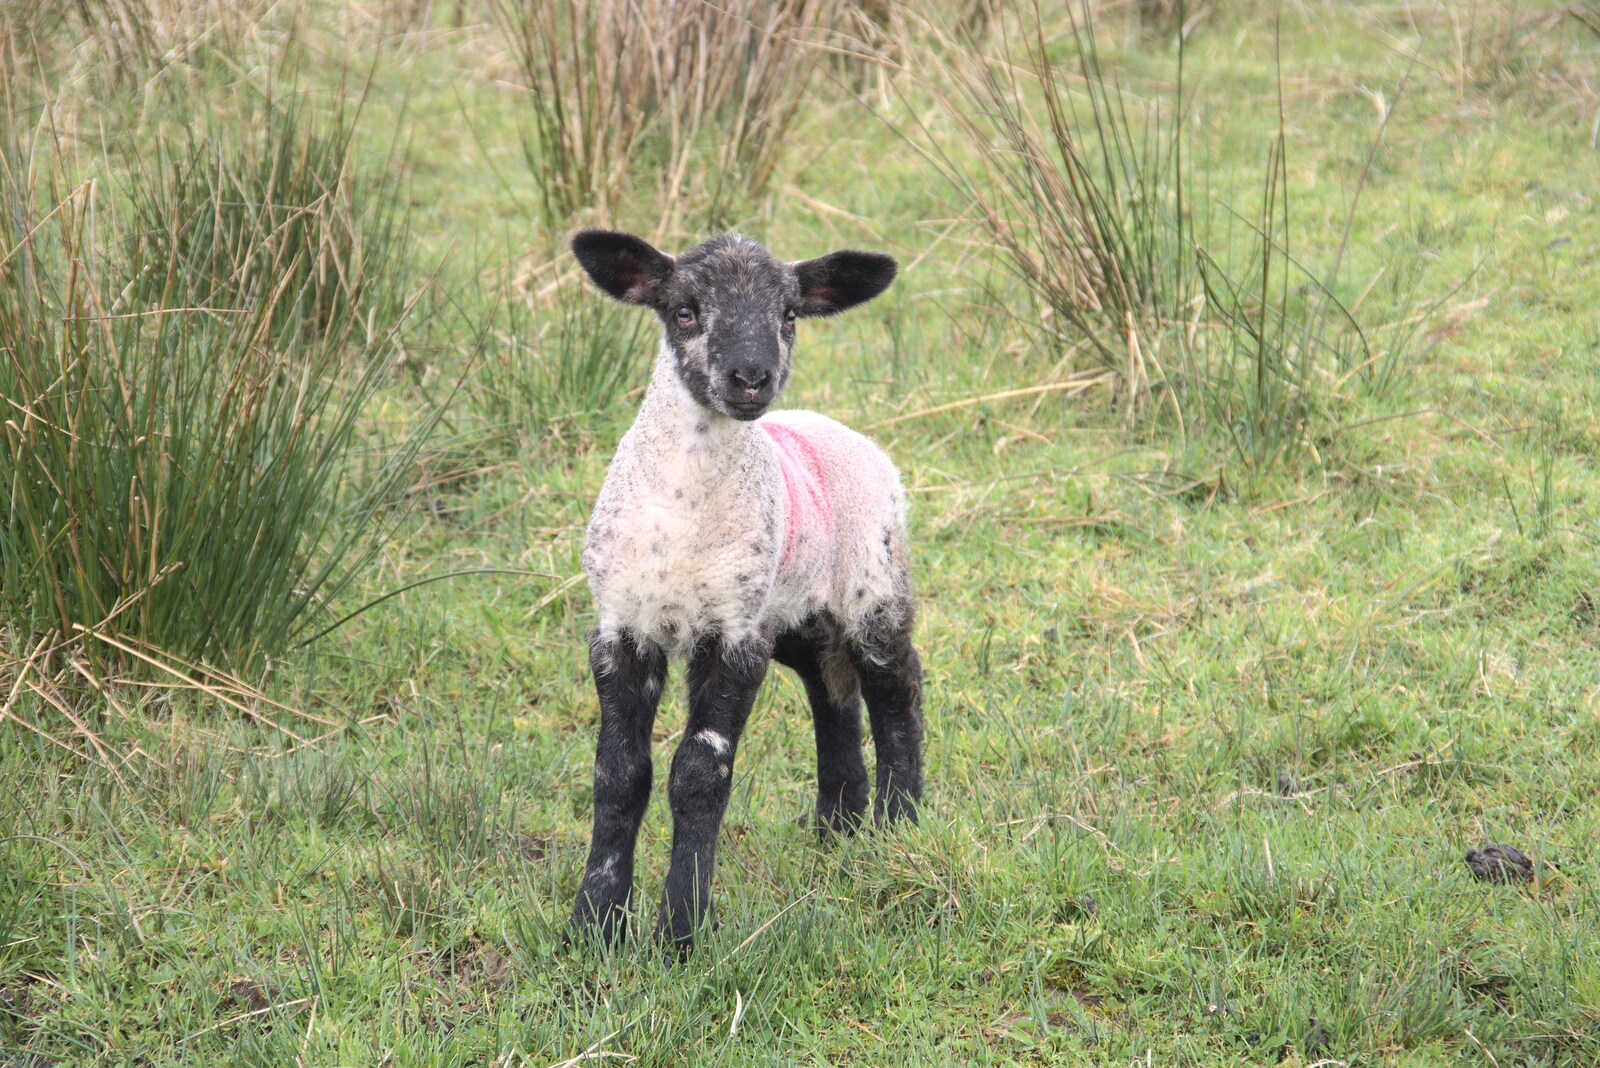 A lamb boings about at Philly's from Manorhamilton and Bundoran, Leitrim and Donegal, Ireland - 16th April 2022